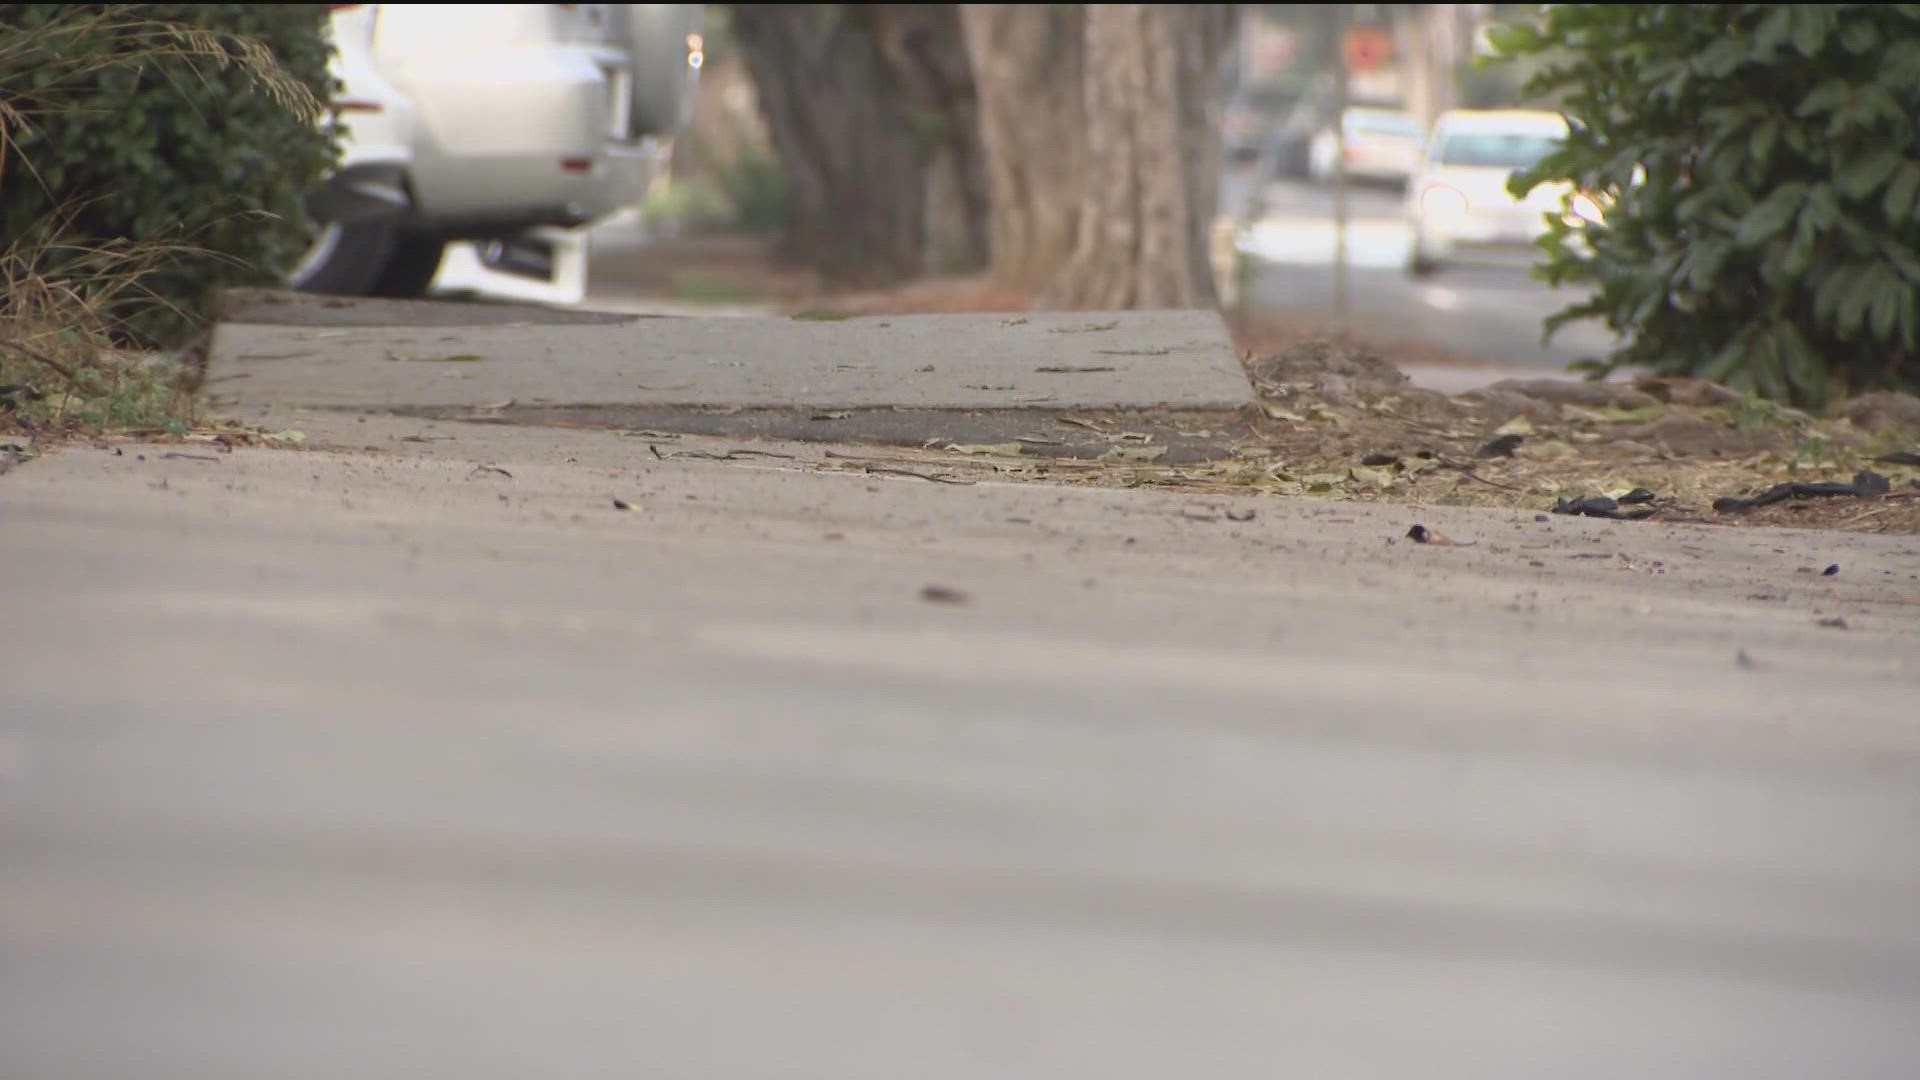 Payouts over San Diego's shattered sidewalks and buckling bike lanes continue as city races to address infrastructure backlog.